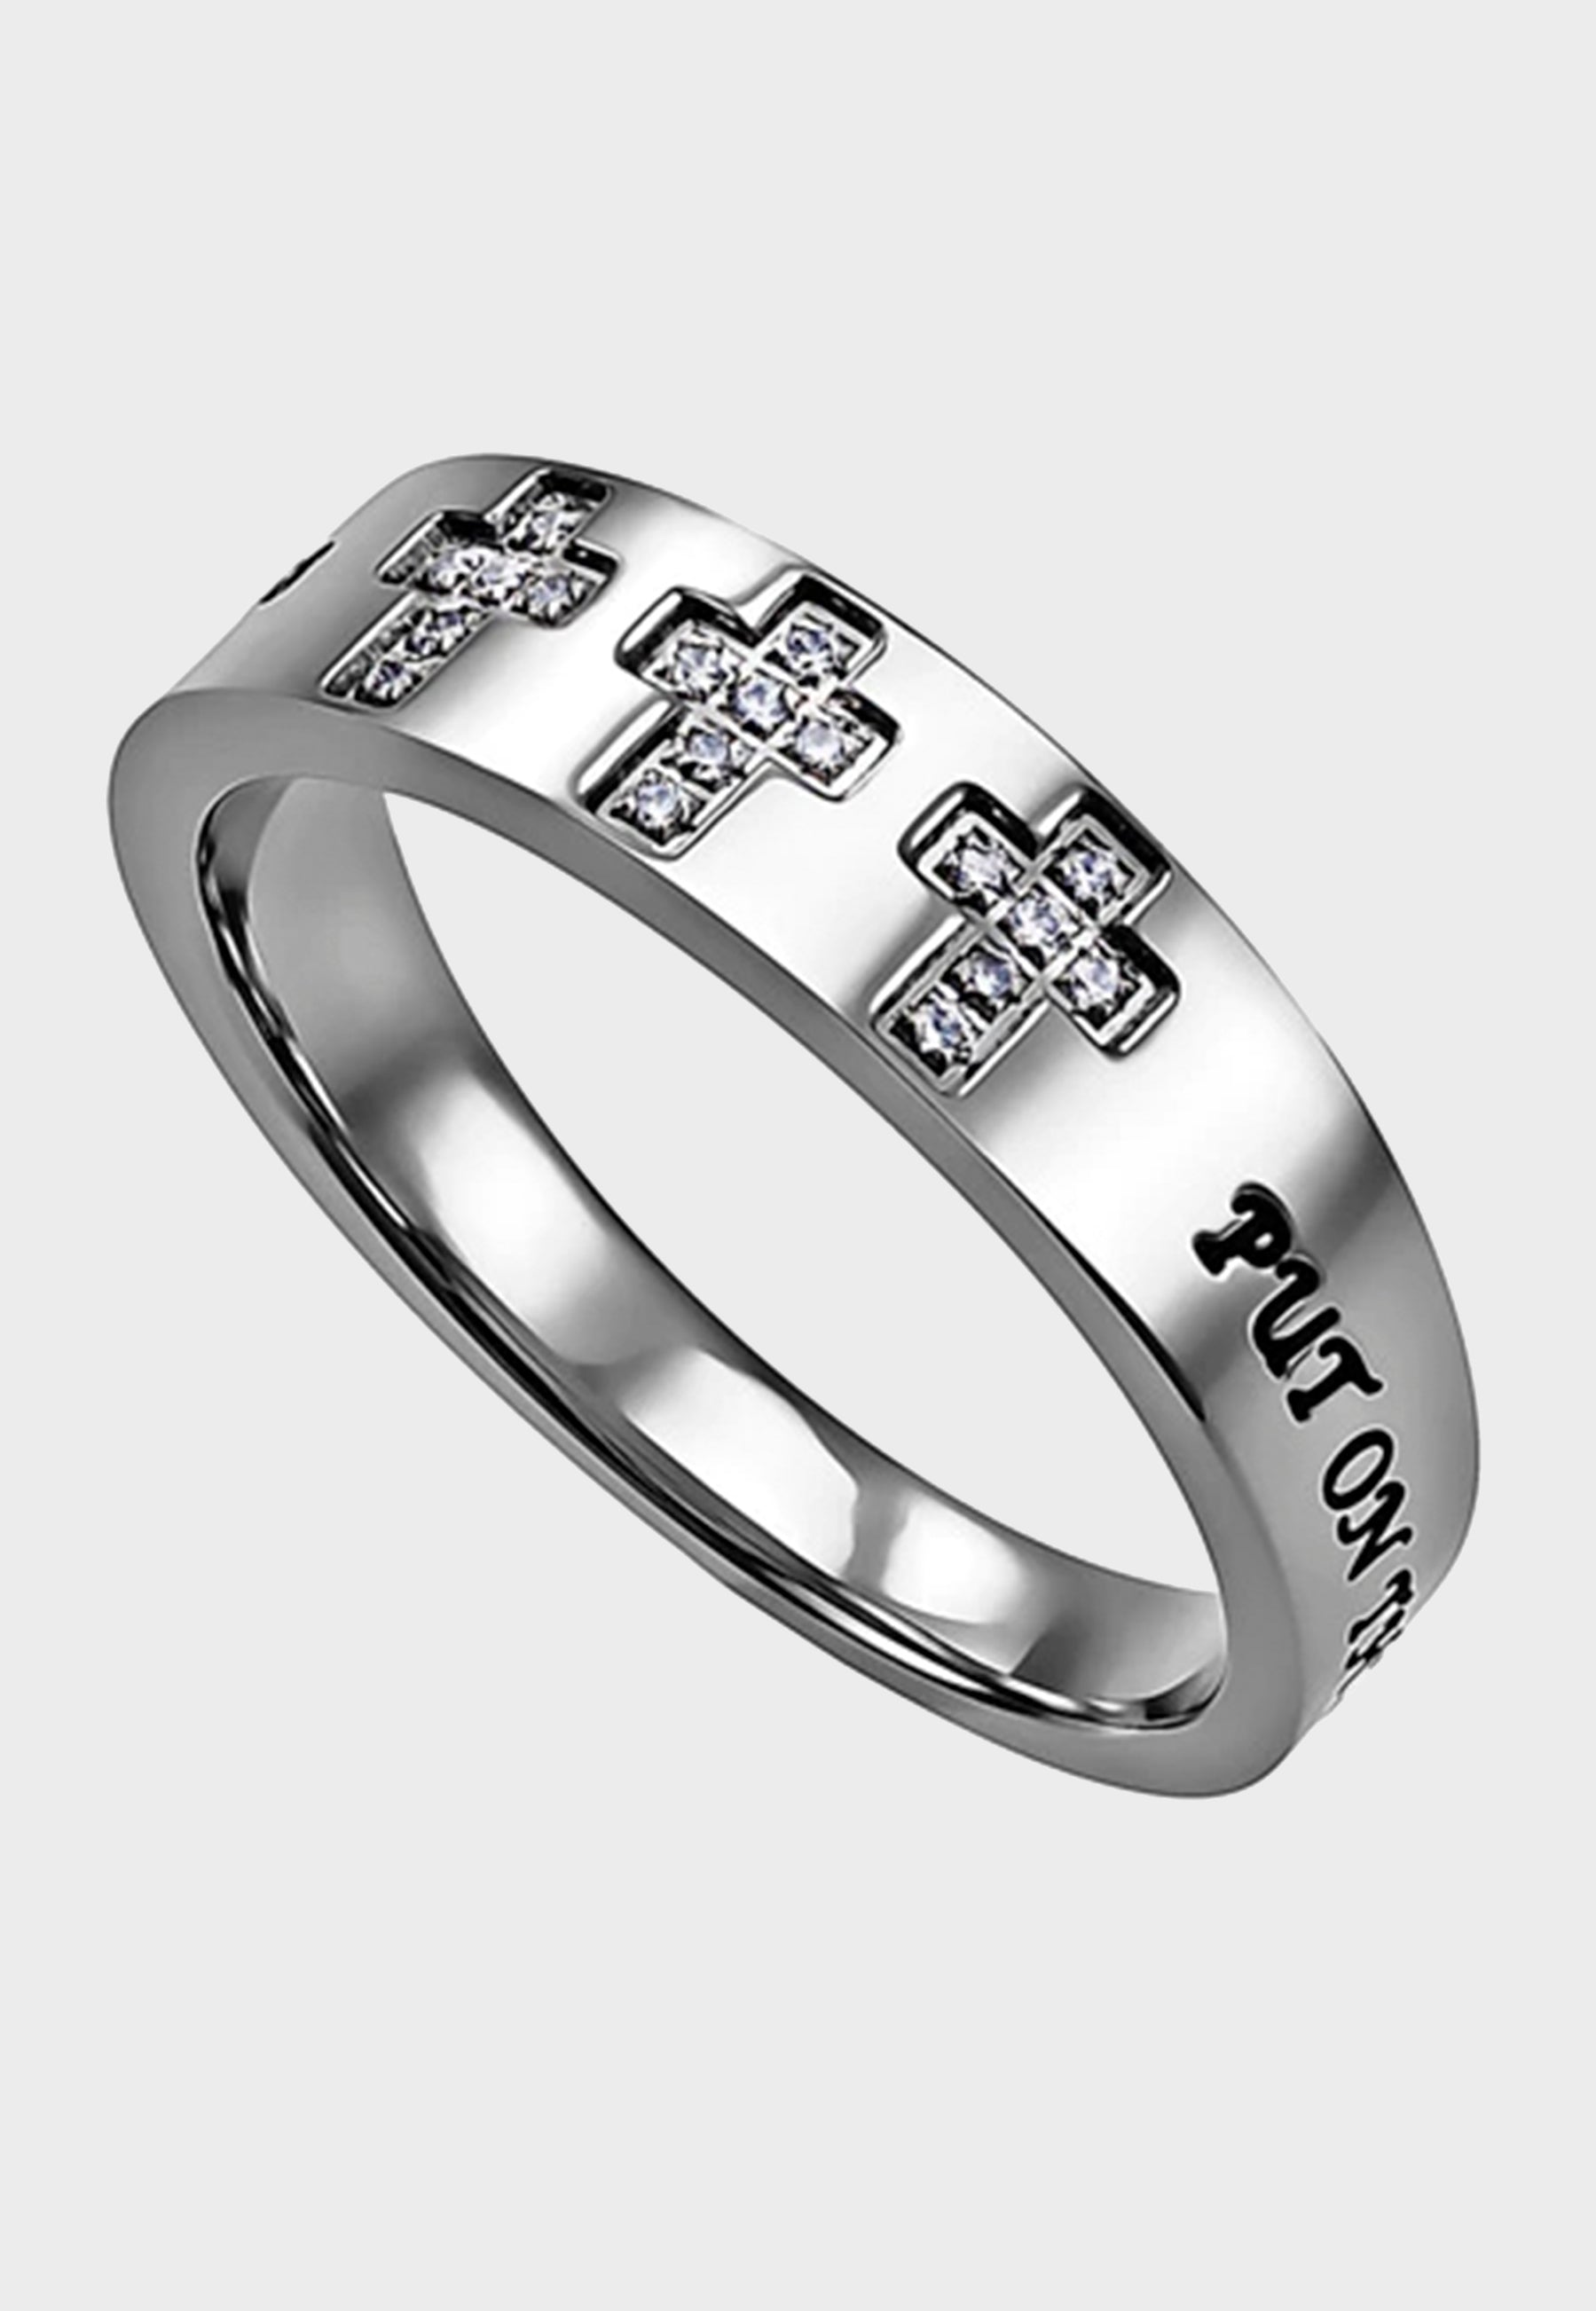 Christian Cross Ring For Men 14k Gold With Iced Out Design, Religious  Jewelry From Lovelord, $71.4 | DHgate.Com